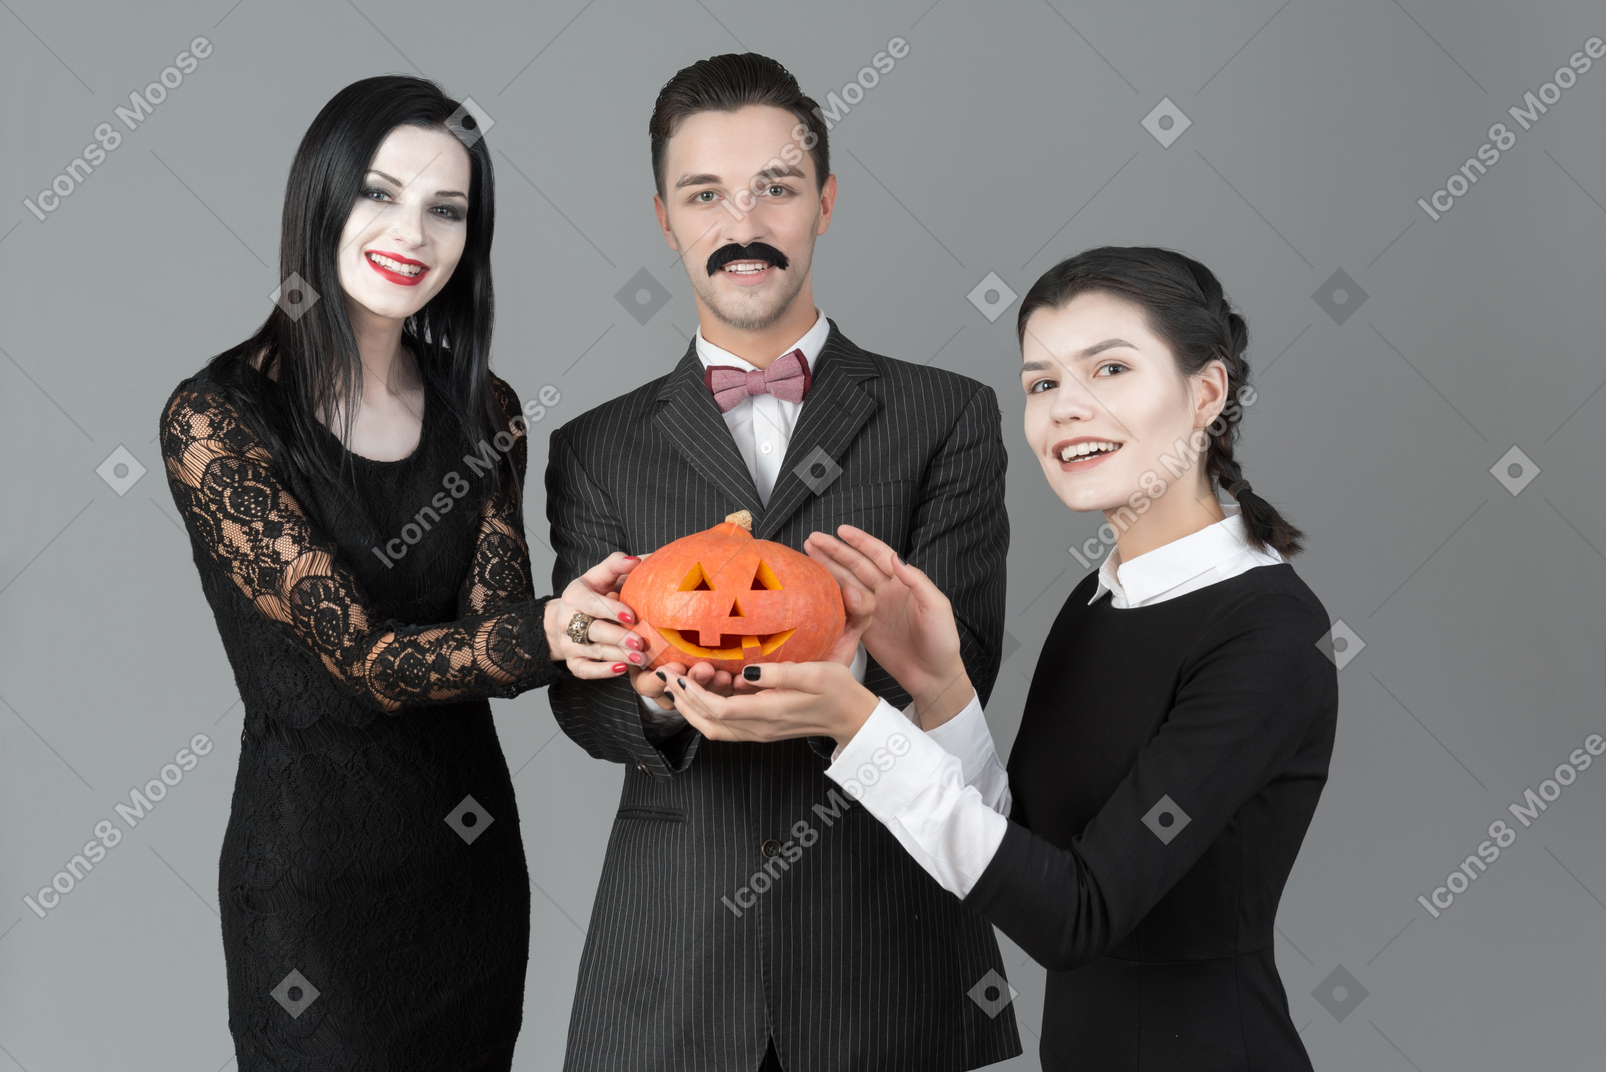 Addams family holding carved pumpkin